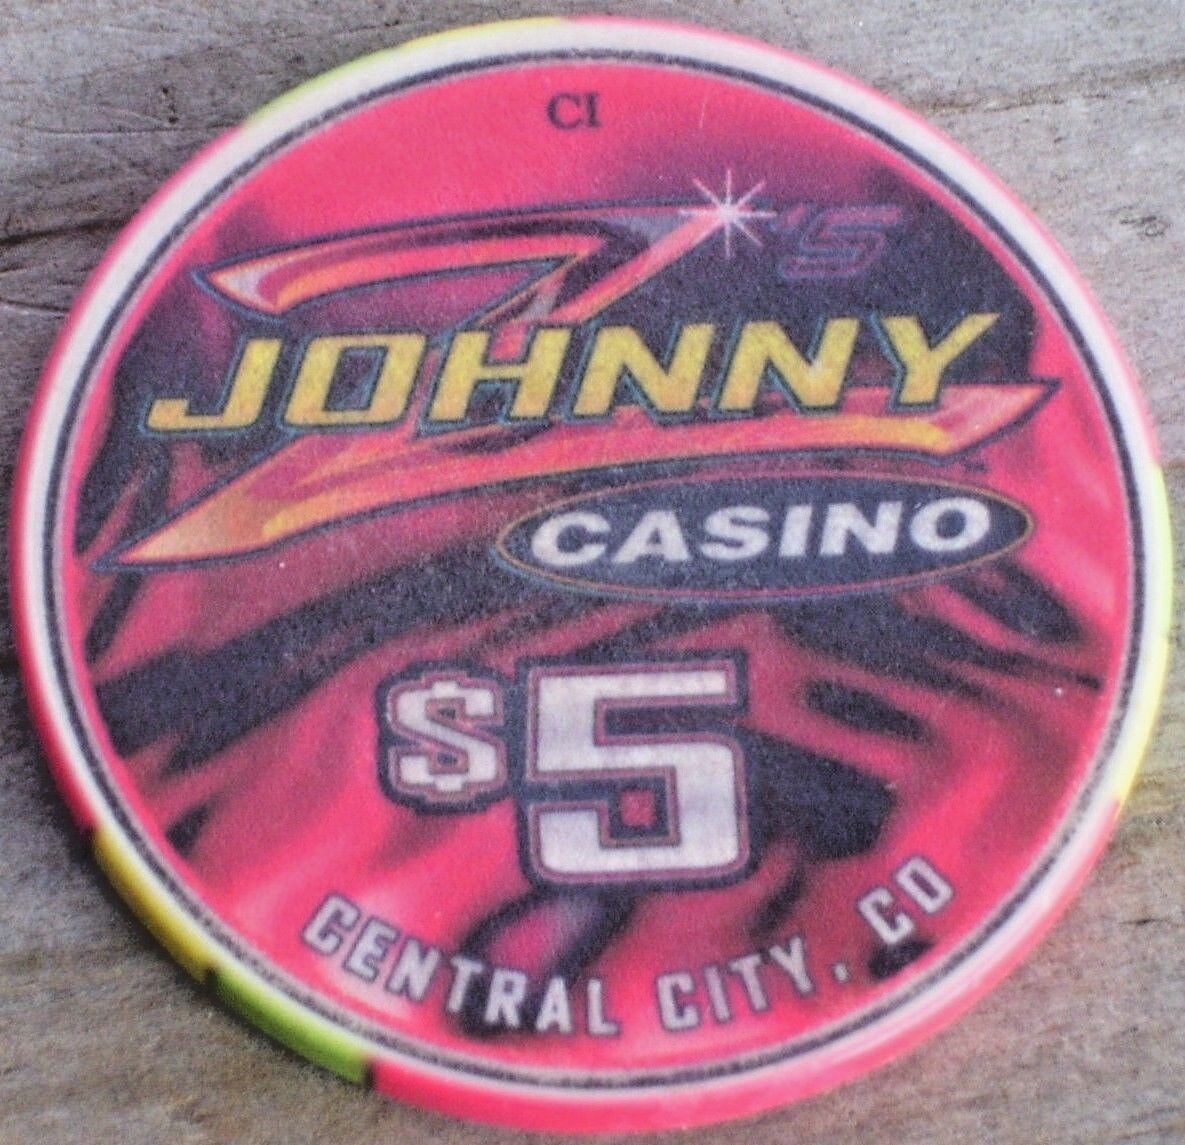 $5 GAMING CHIP FROM THE JOHNNY Z\'S CASINO CENTRAL CITY CO